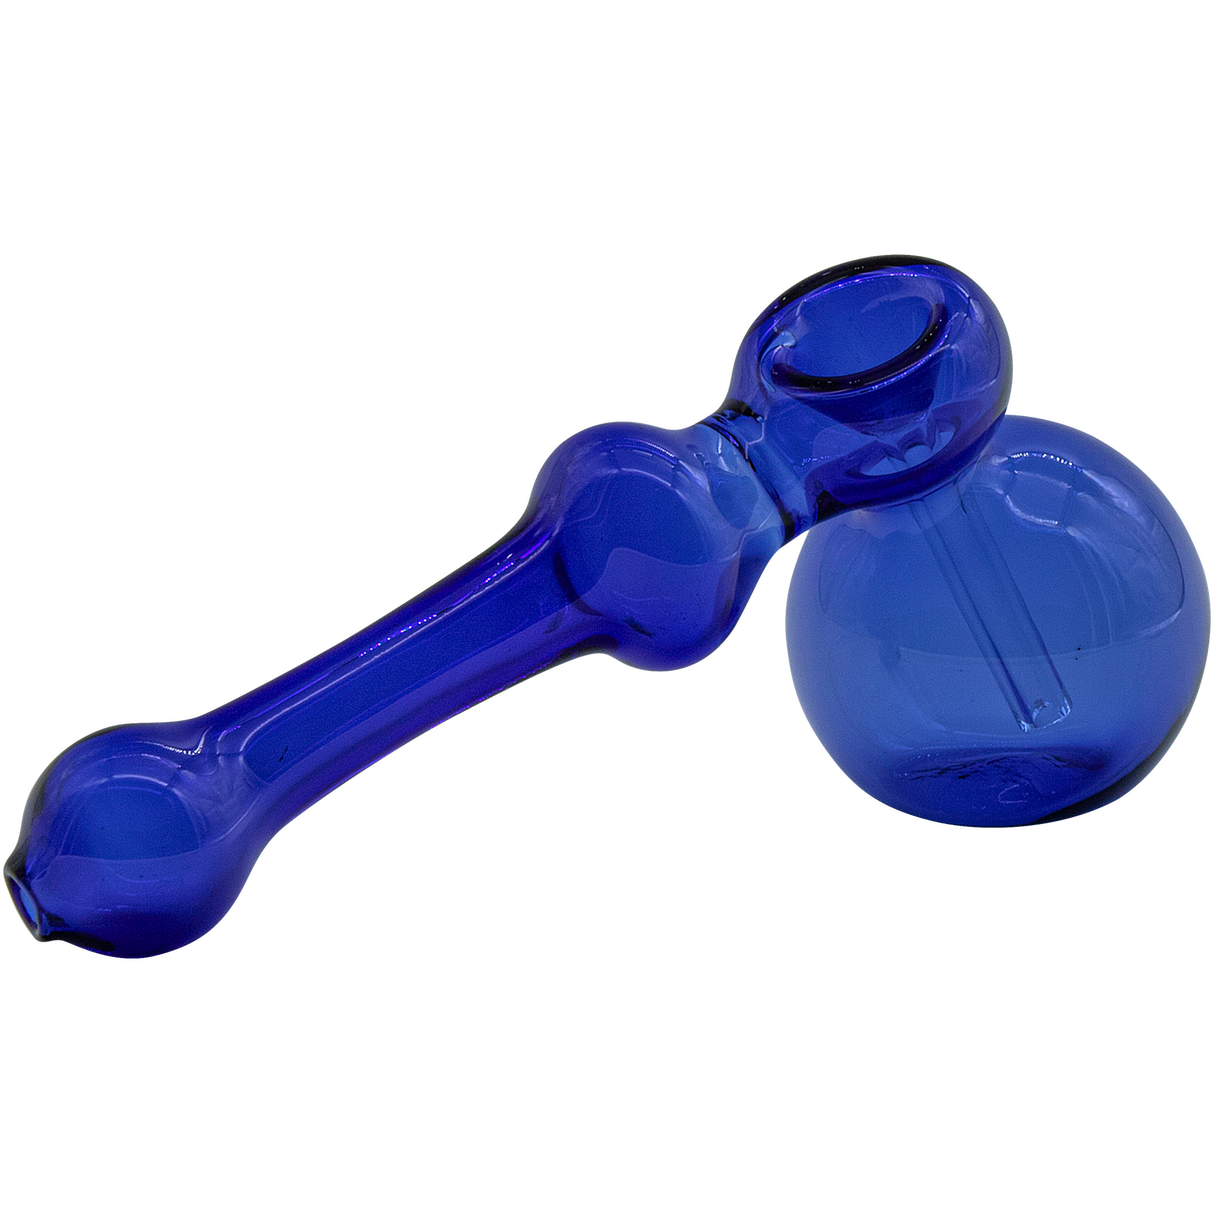 LA Pipes Glass Hammer Bubbler Pipe in Blue, Borosilicate Glass, 6" Length, for Dry Herbs